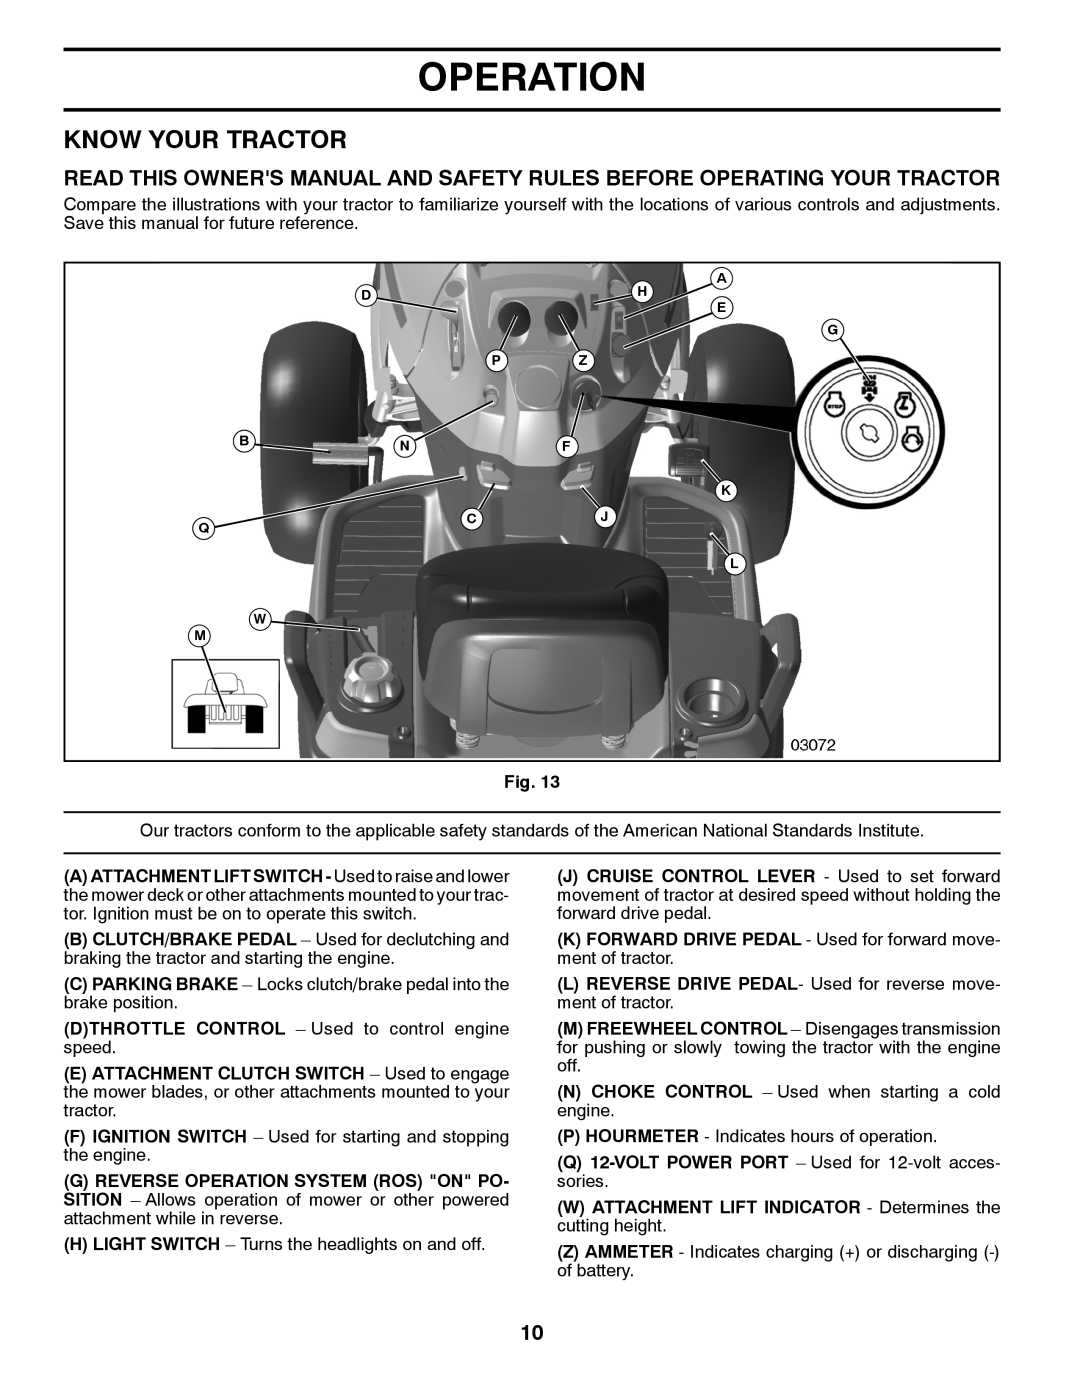 Husqvarna 96043006800, 2354GXLS owner manual Know Your Tractor, Operation 